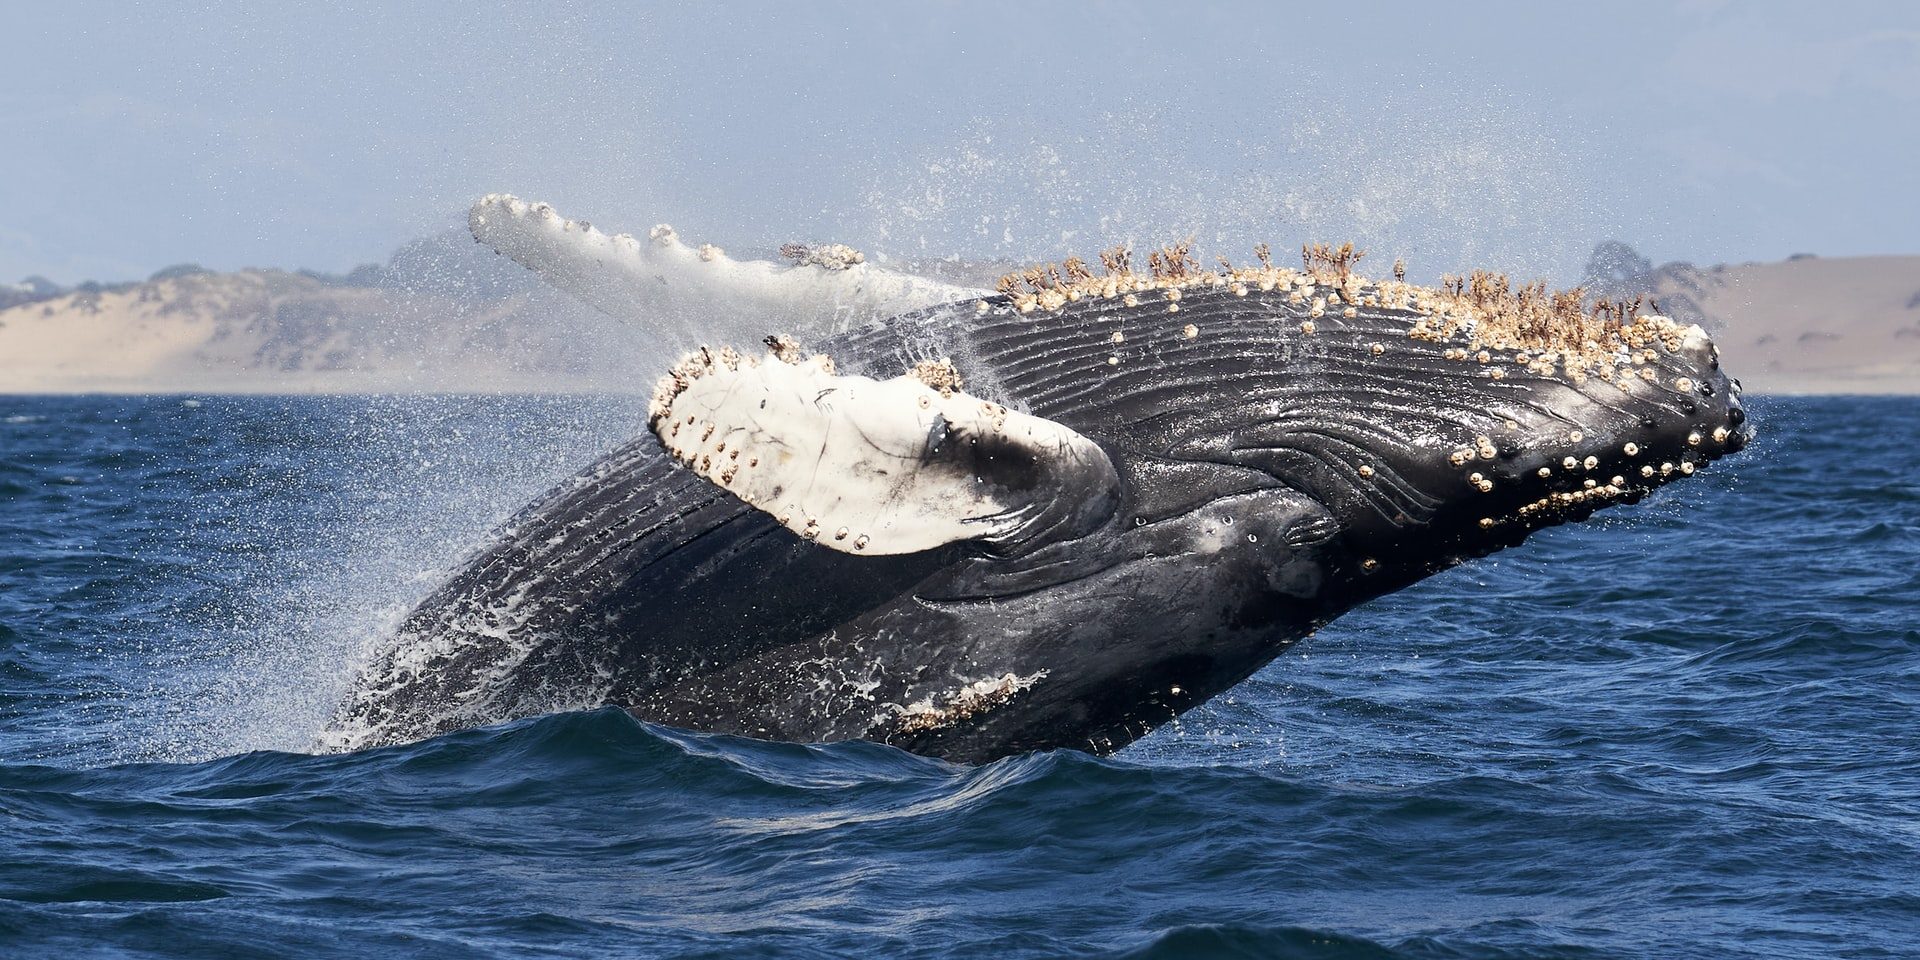 A Humpback whale breaches, swimming up towards the surface until it continues into the air. Barnacles dangle from their anchor points on the whale's chin. September 28, 2020, Monterey Bay.